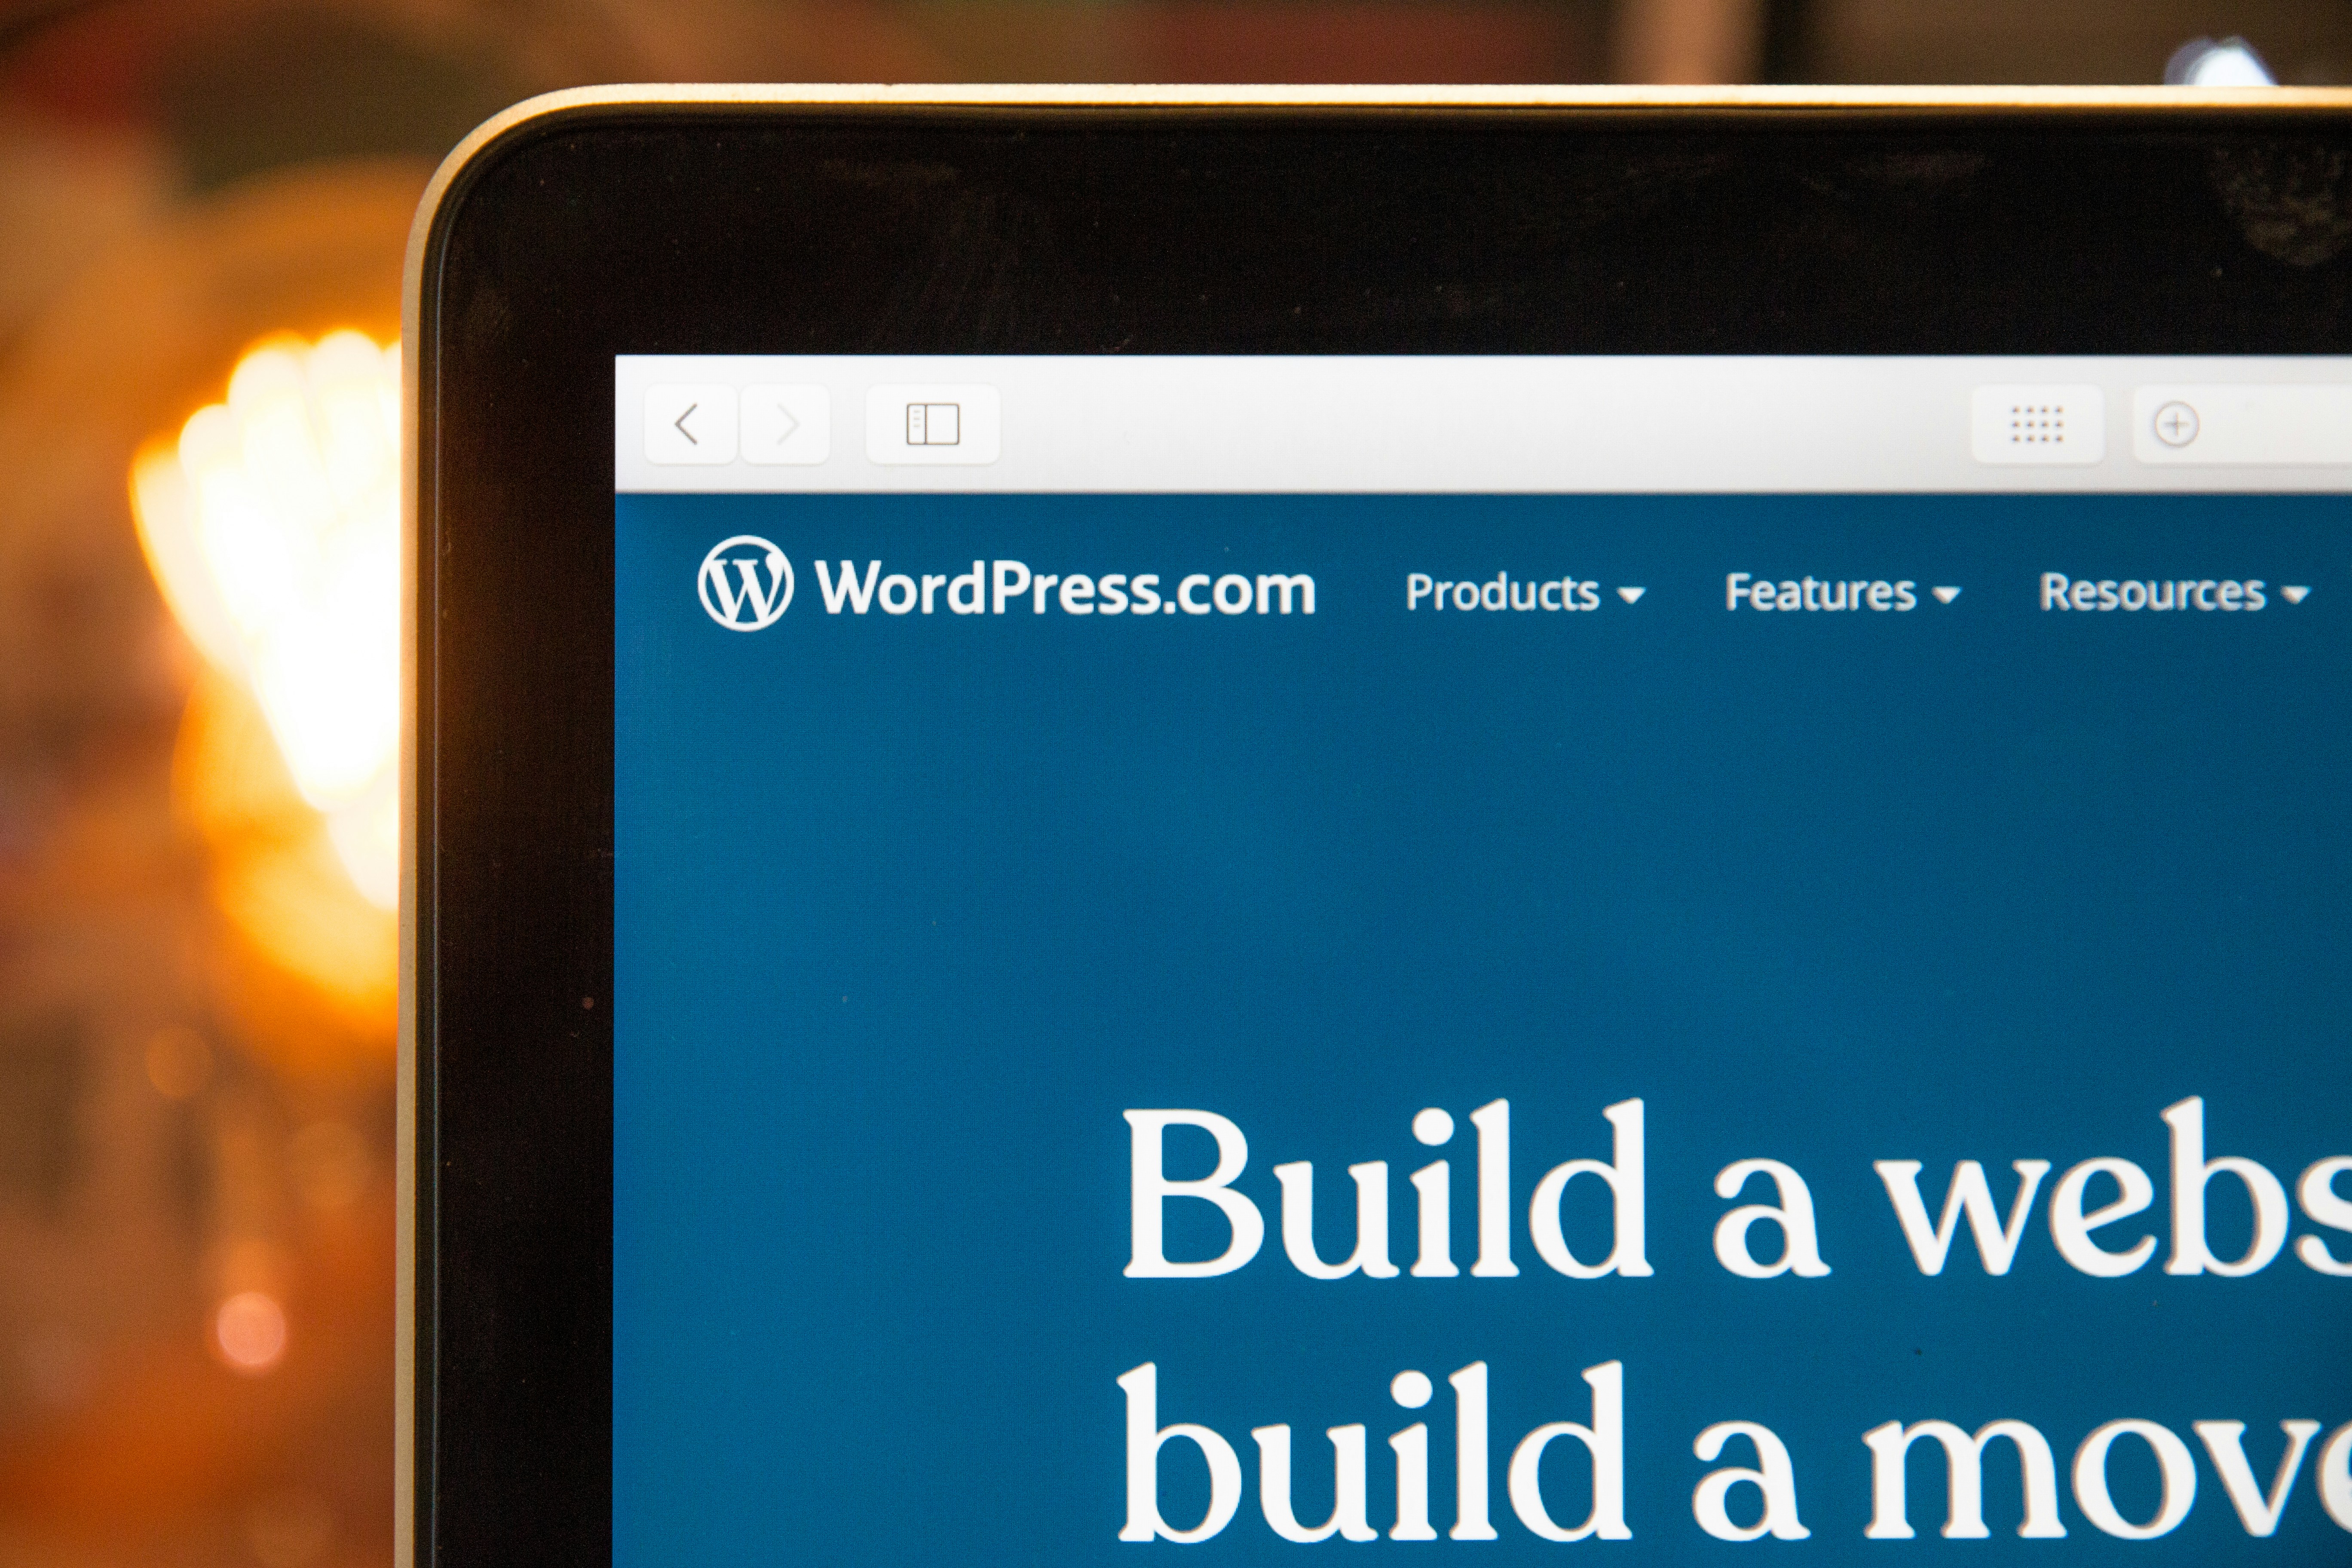 Why did we switch from Squarespace to Wordpress